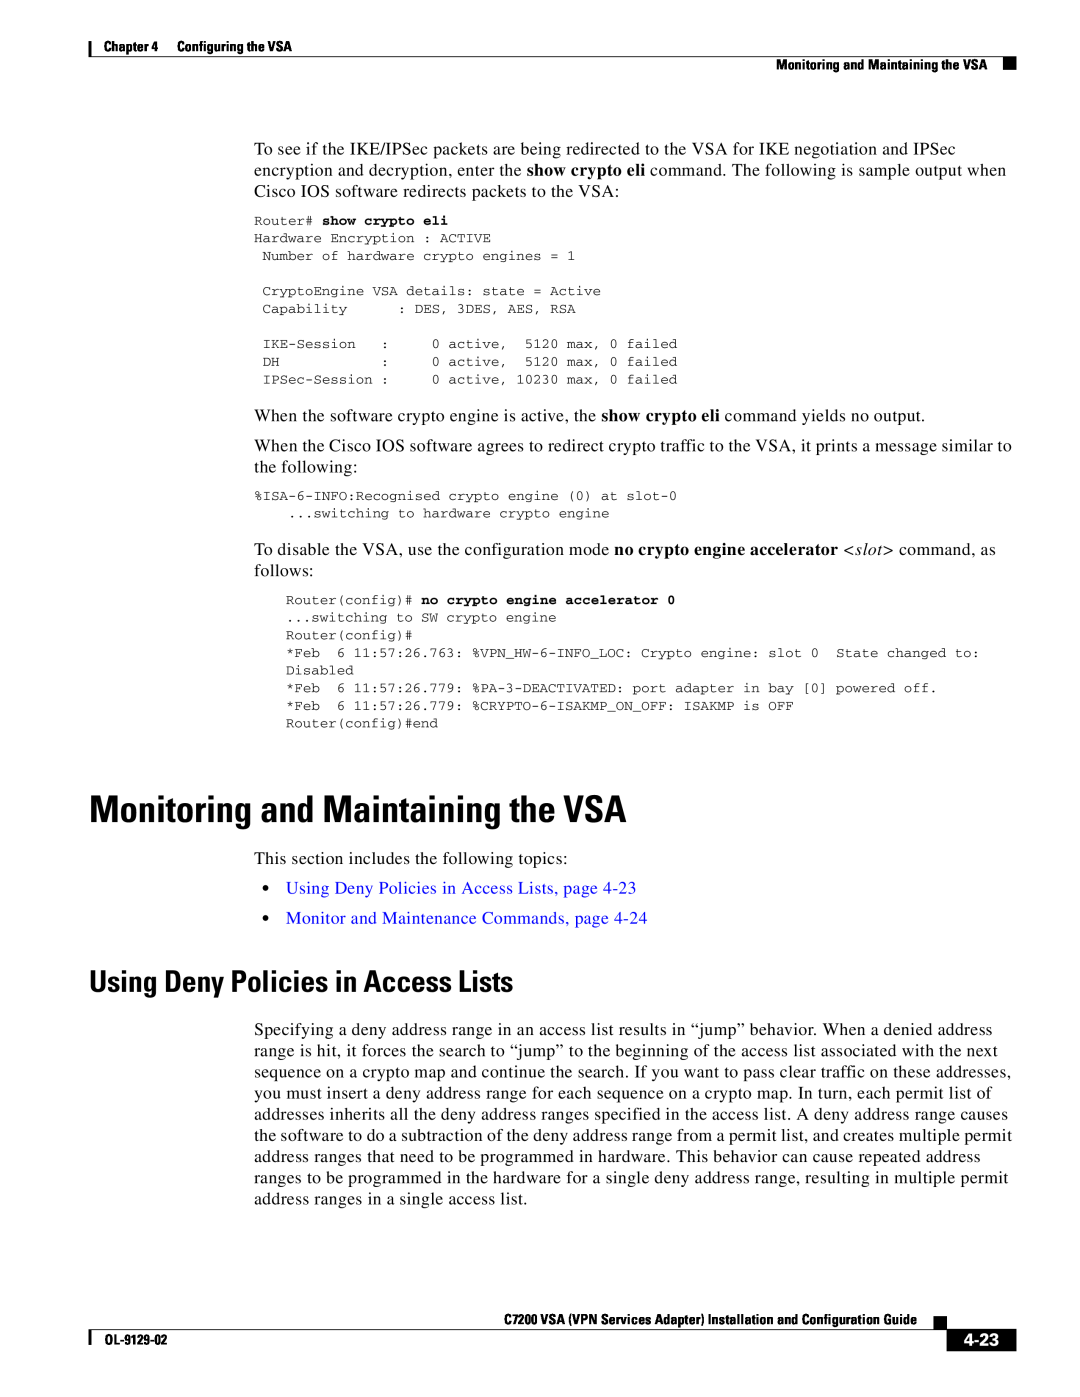 Cisco Systems C7200 manual Monitoring and Maintaining the VSA, Using Deny Policies in Access Lists, 4-23 